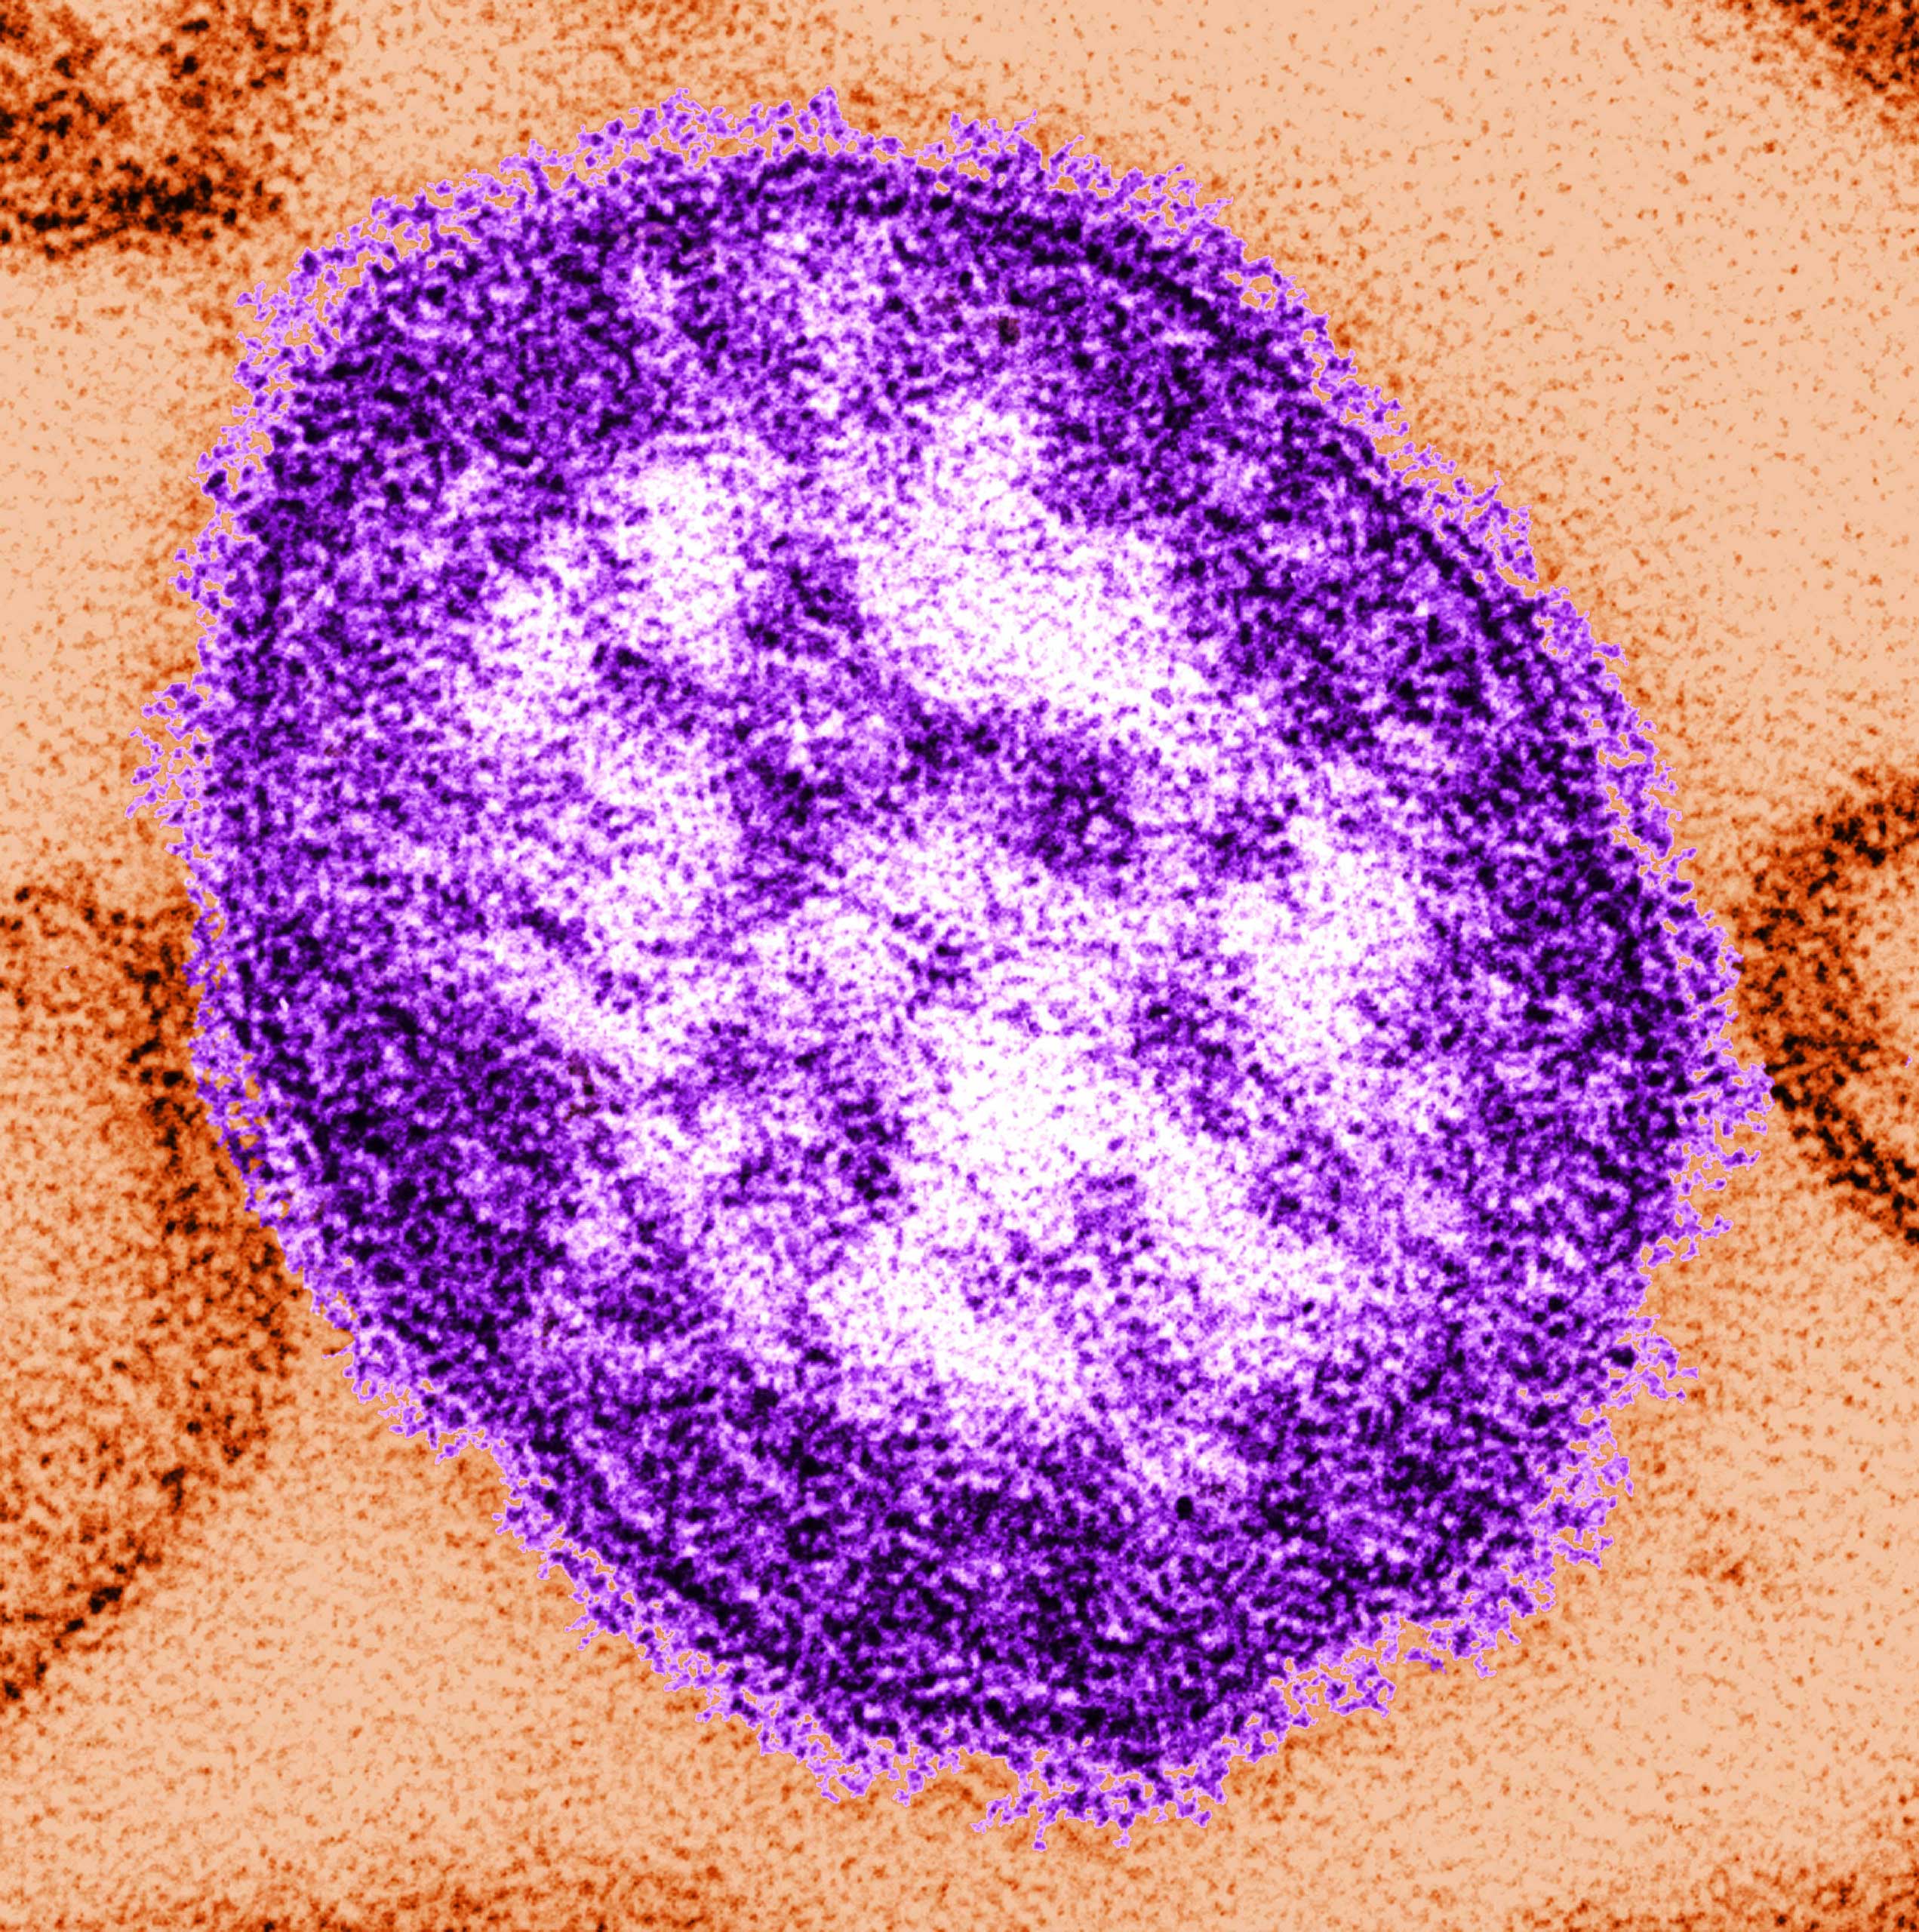 A thin-section transmission electron micrograph (TEM) reveals the ultrastructural appearance of a single virus particle, or "virion", of measles virus. (CDC/Getty Images)